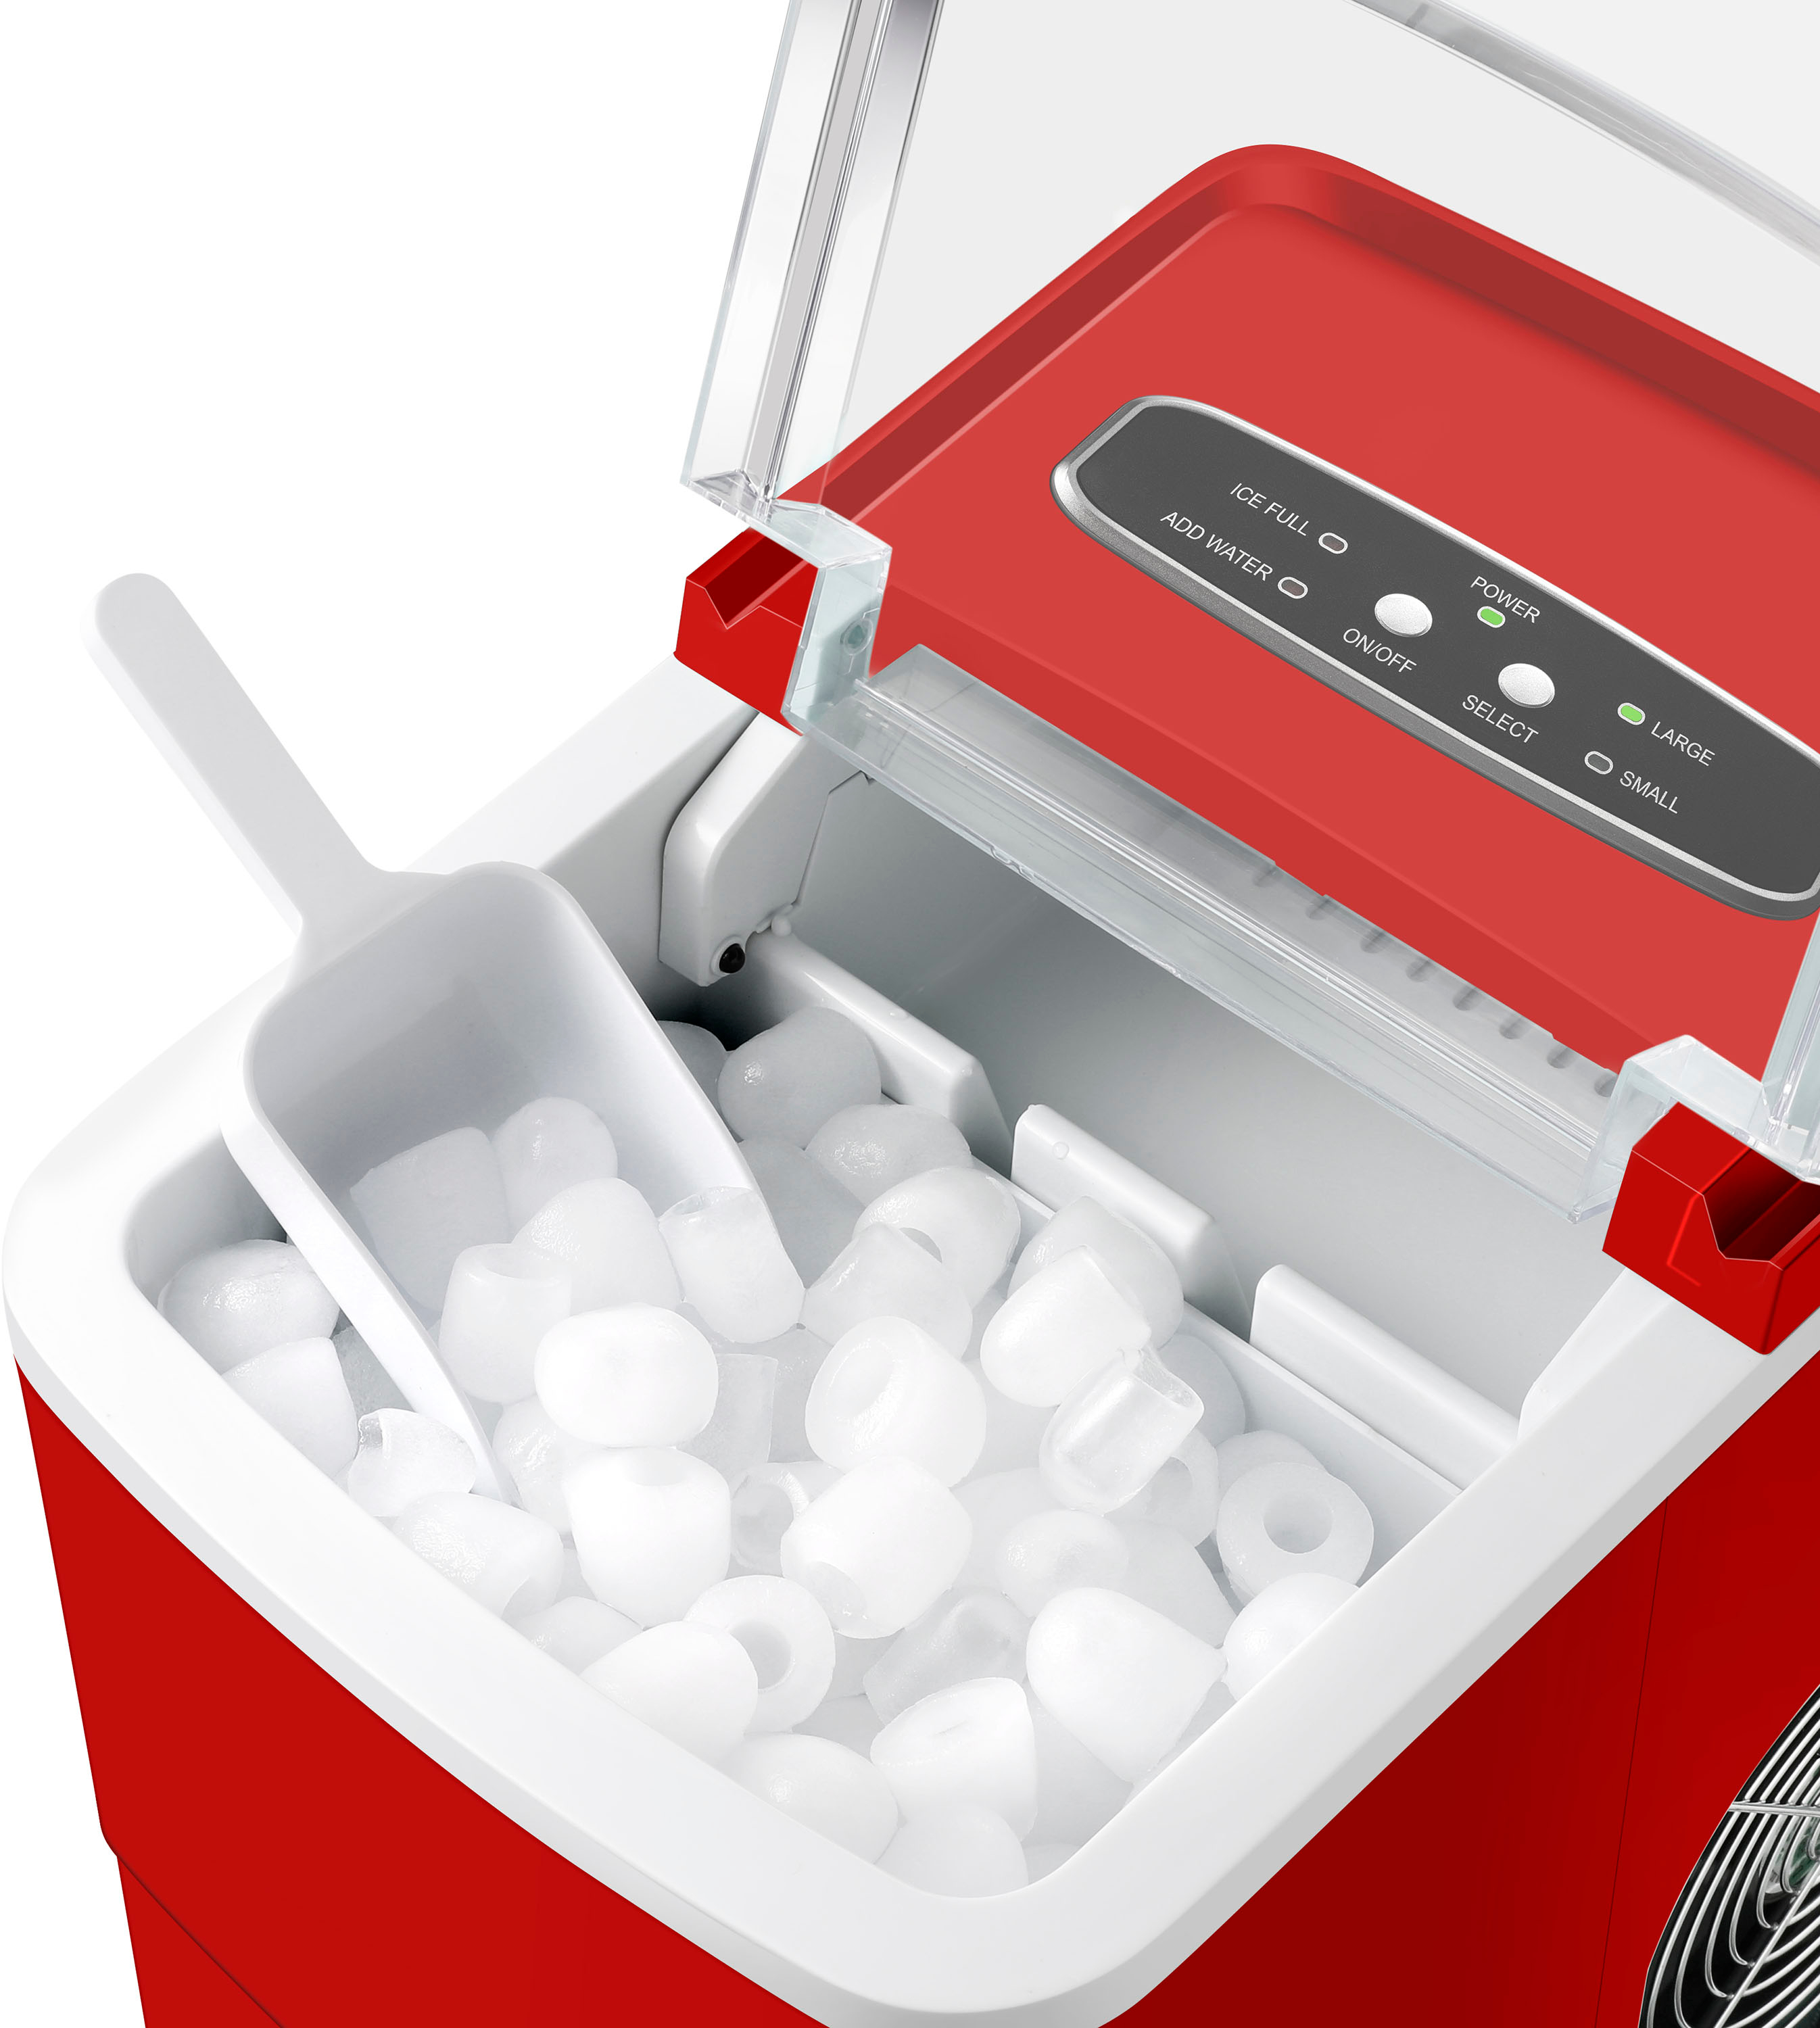 Flash sale: Snag this Insignia ice maker for 43% off